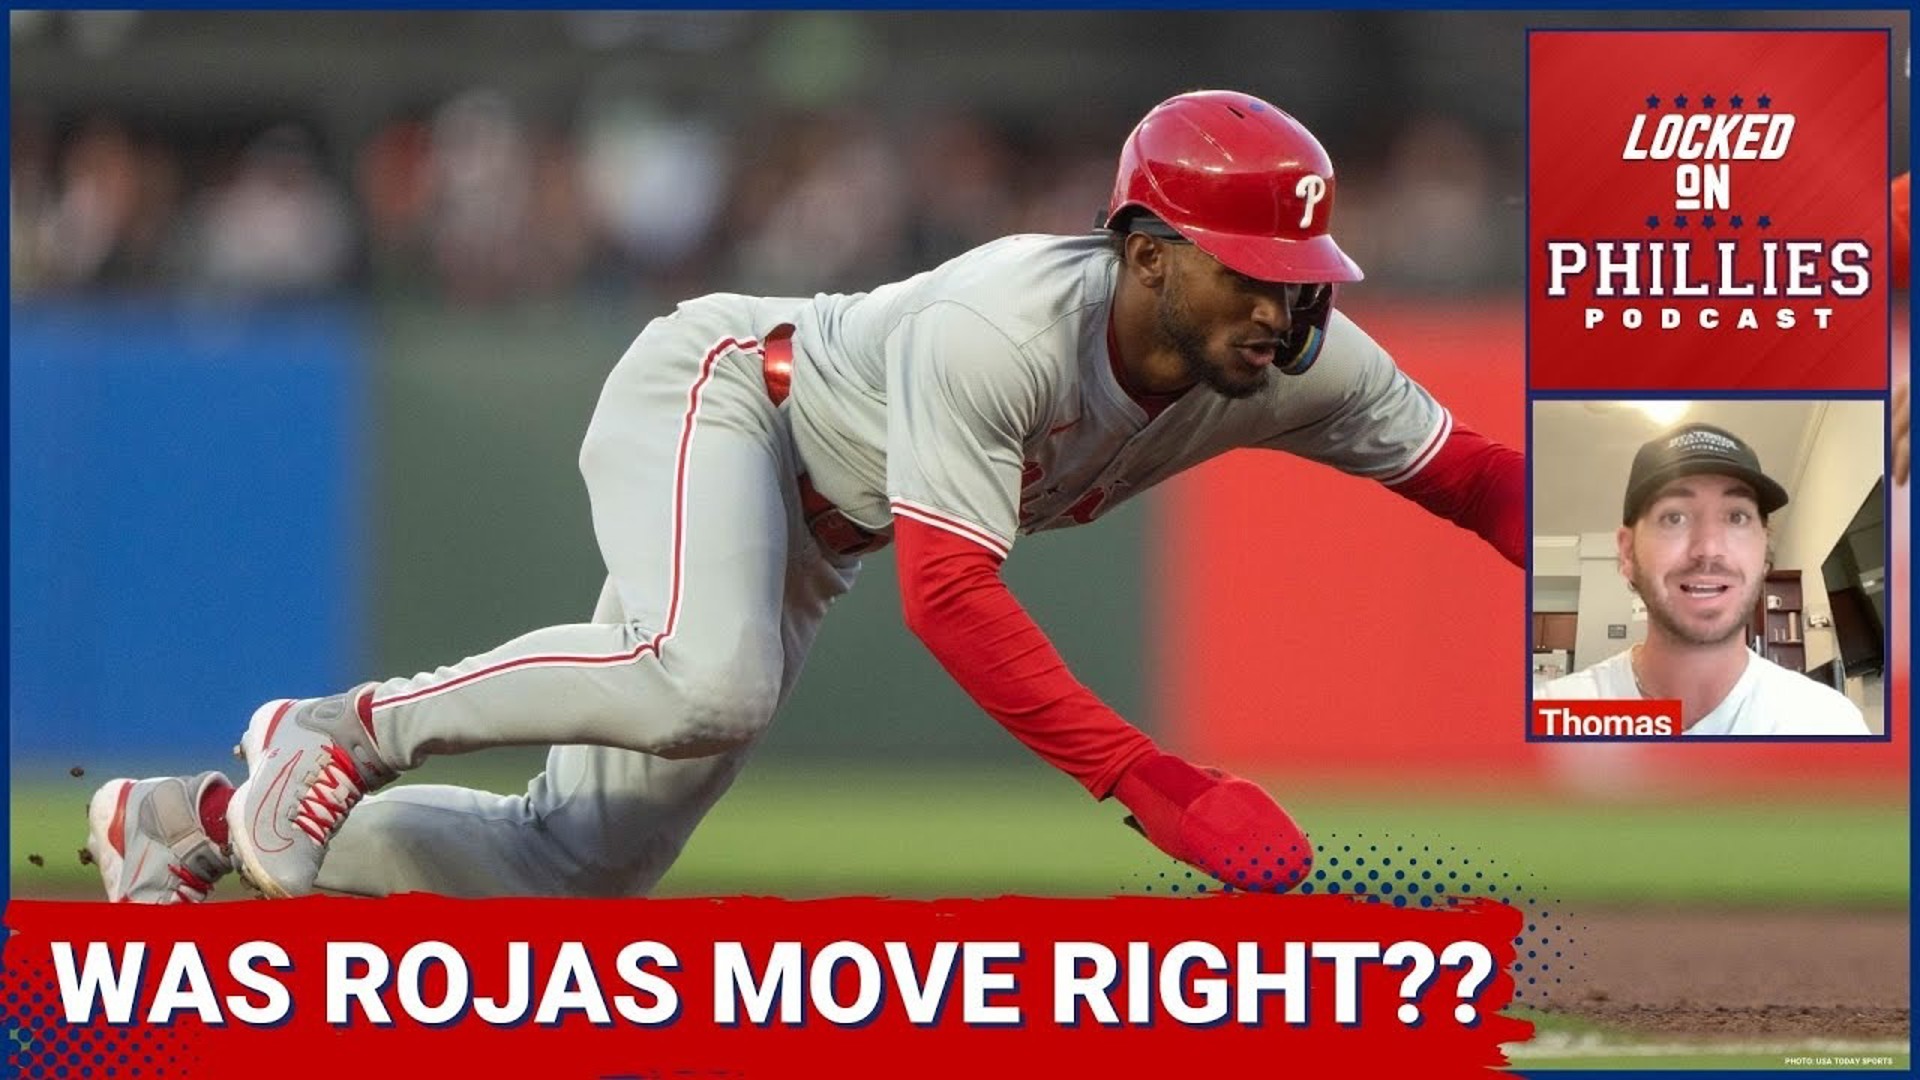 In today's episode, Connor takes a deep dive into the Philadelphia Phillies' current outfield situation.